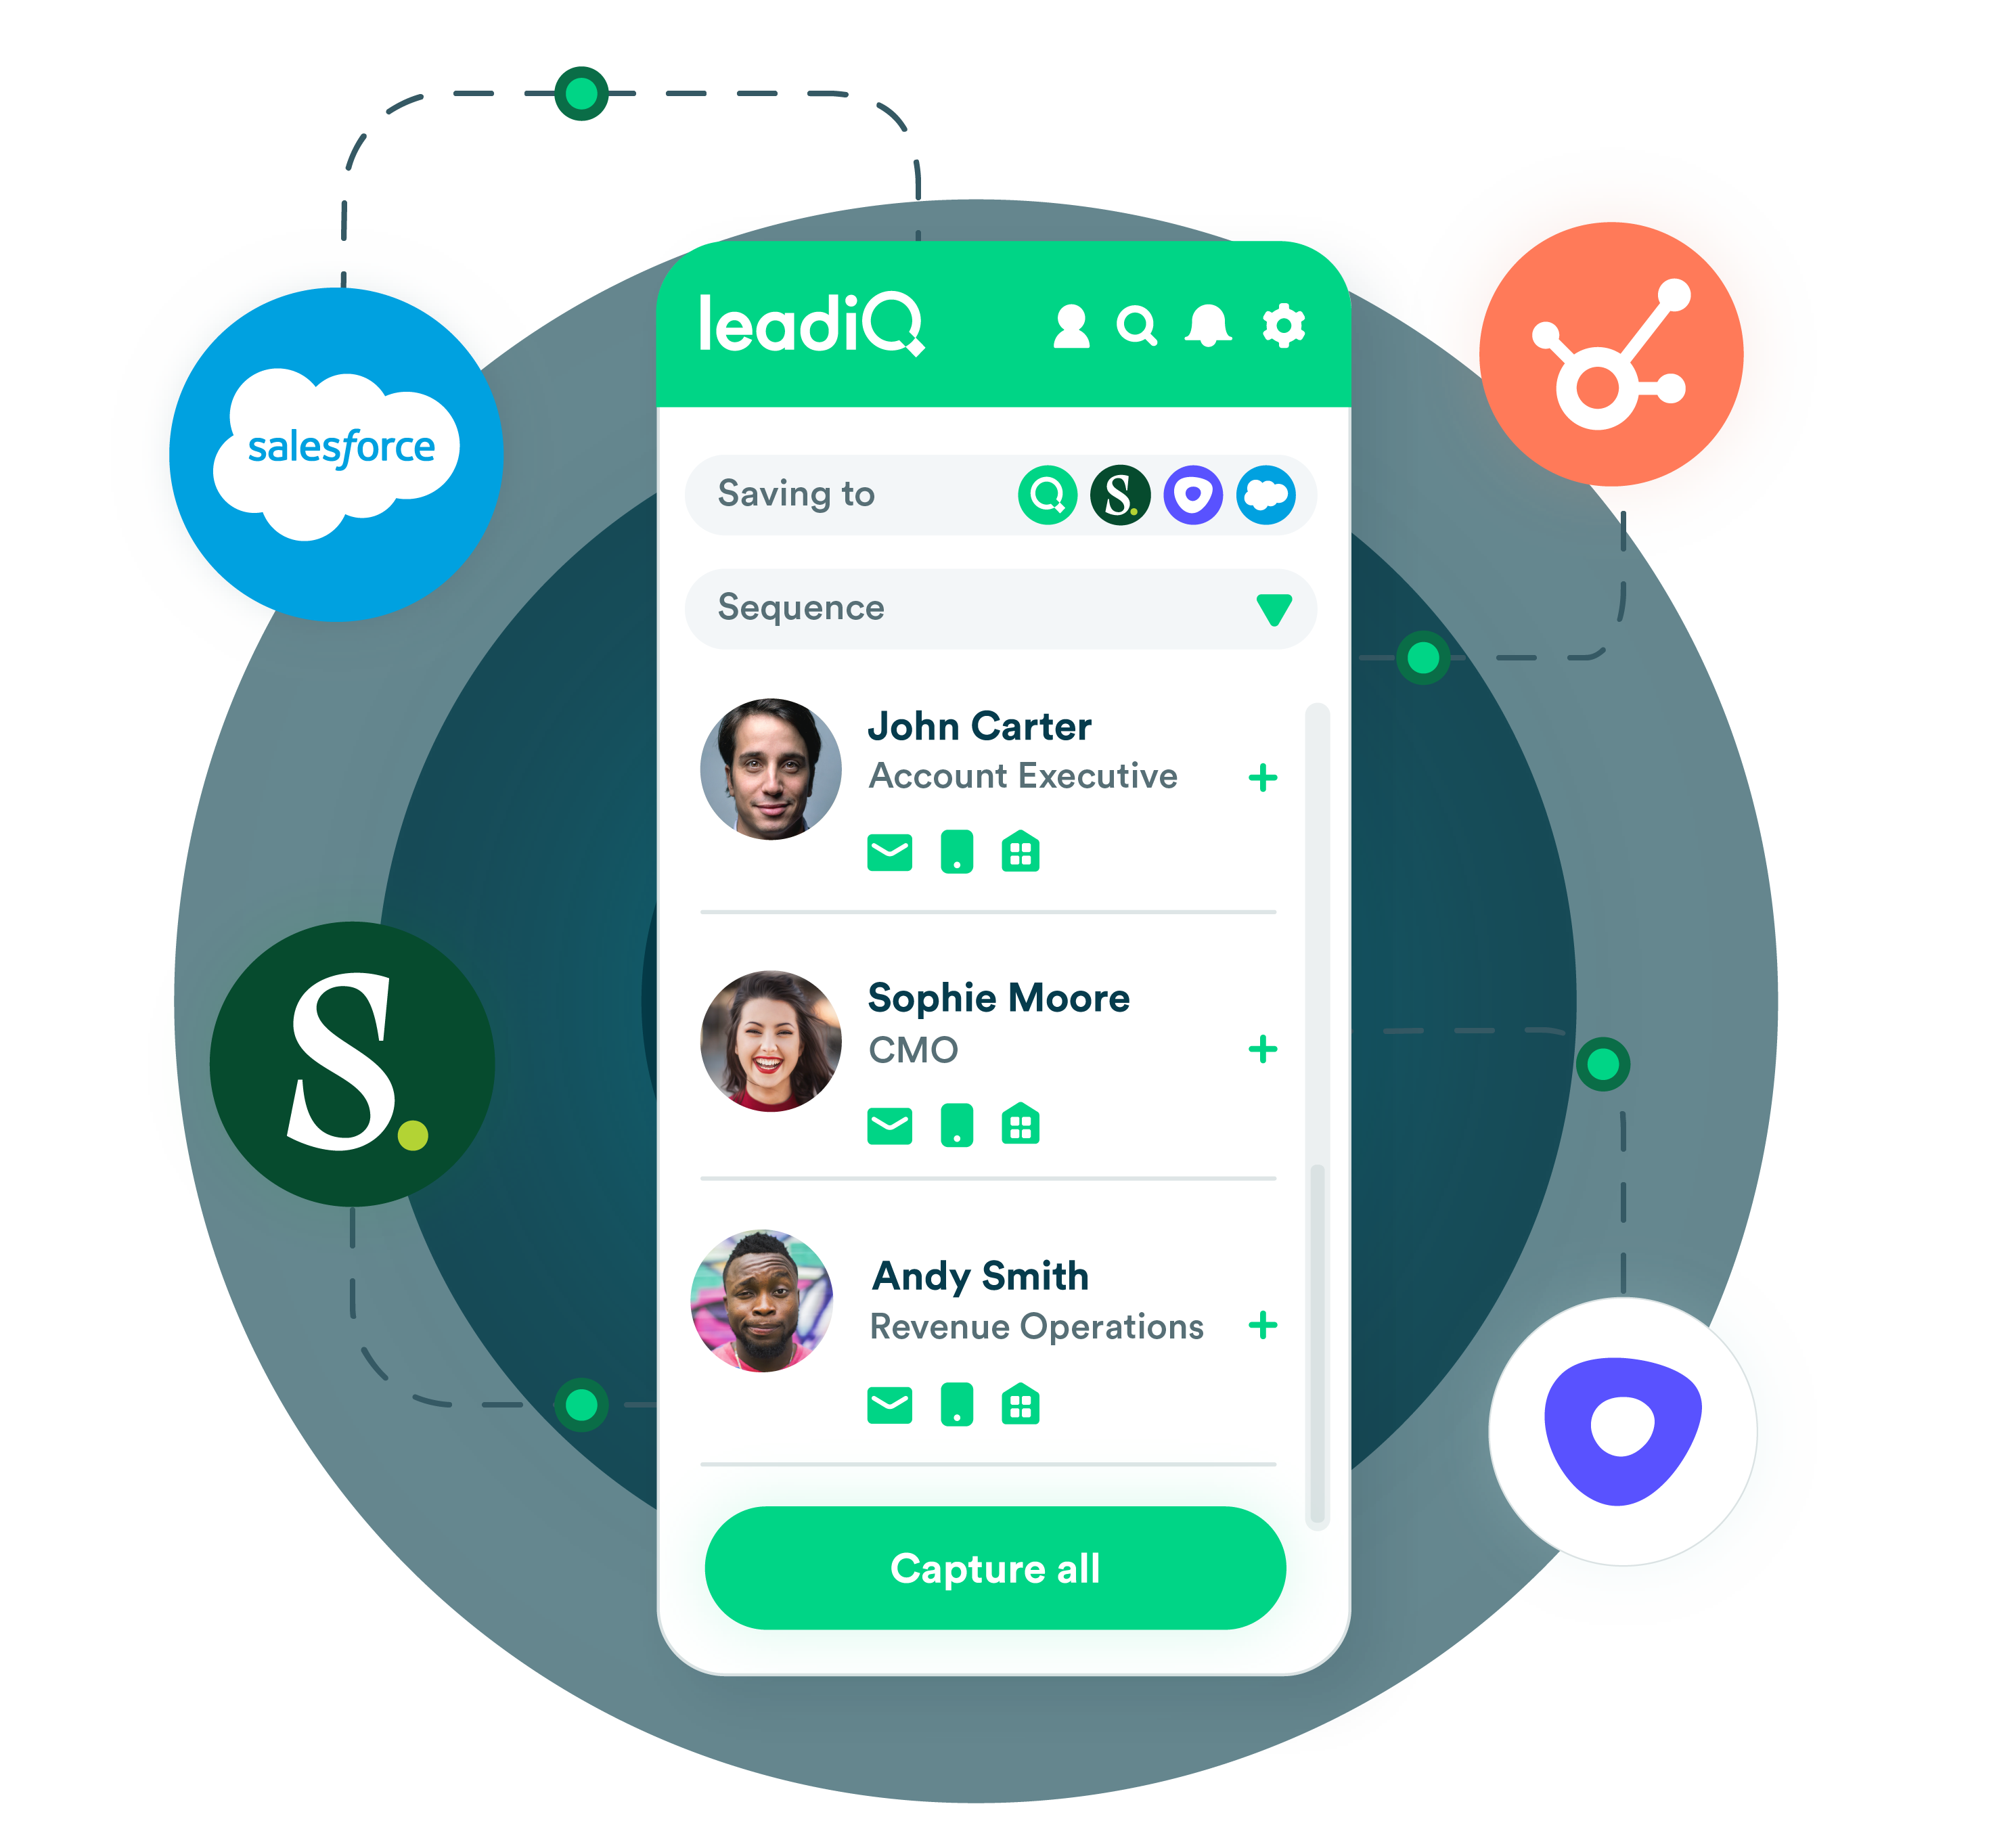 All the tools you need, working together. LeadIQ connects your favorite sales tools with seamless integrations to Salesforce, Hubspot, LinkedIn, Outreach, Salesloft, GSuite, & Slack.